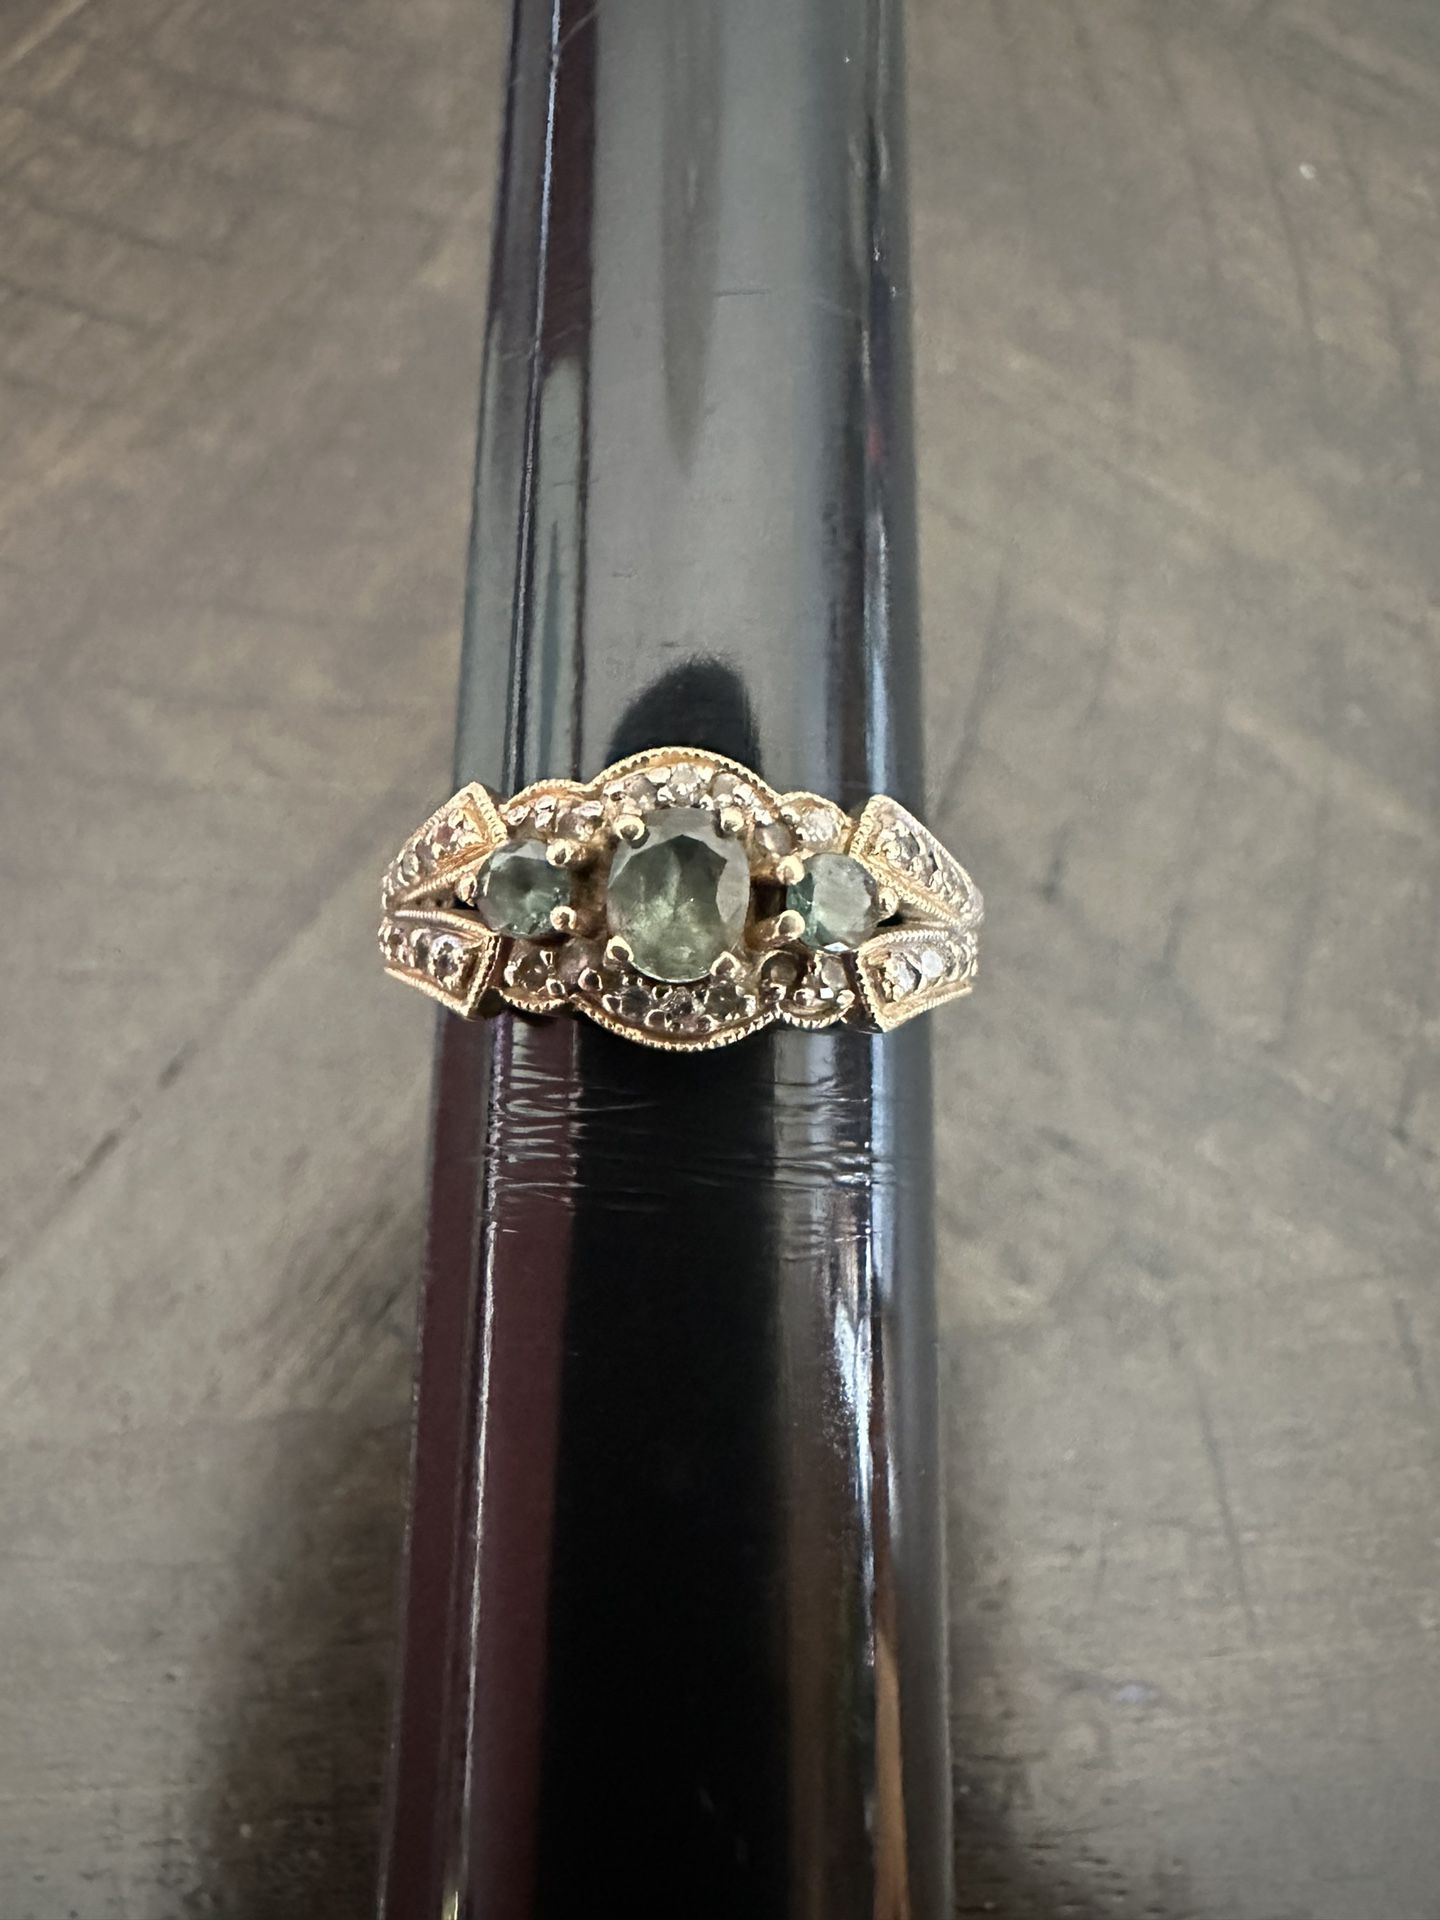 14k gold diamond and green stone ring signed WB beautiful vintage ring 